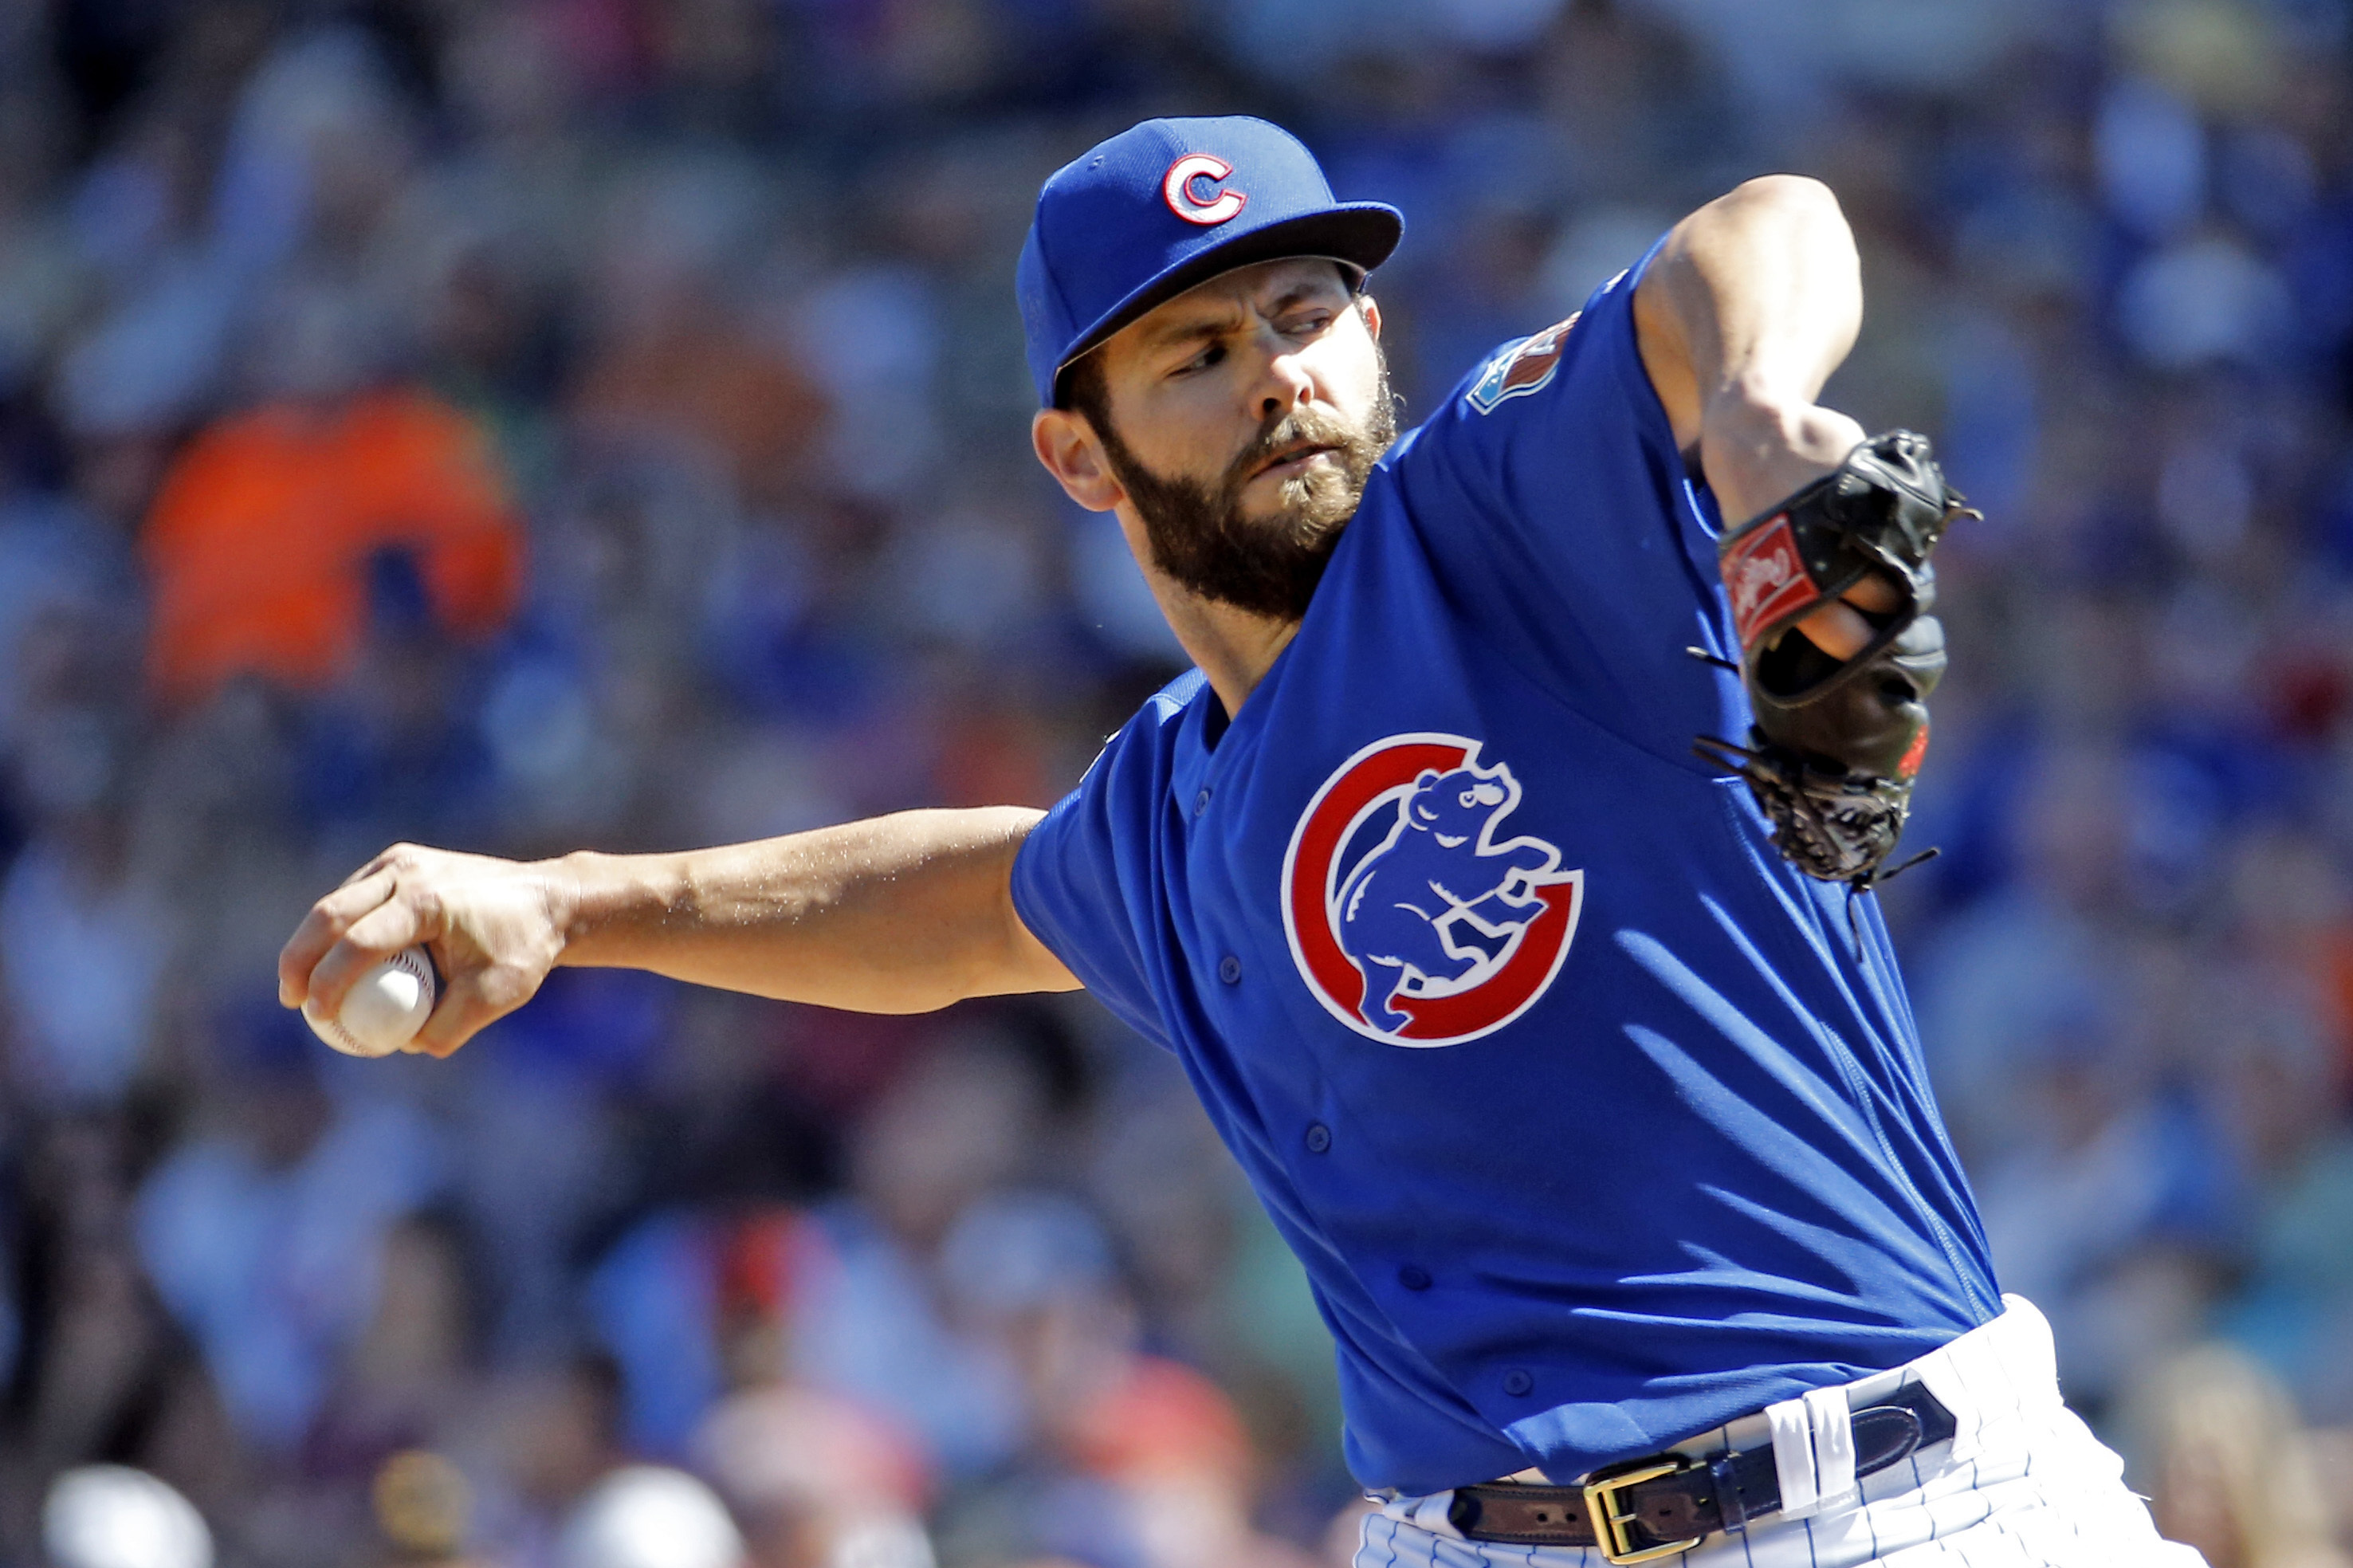 Jake Arrieta Was One of the Best Cubs Pitchers We've Seen